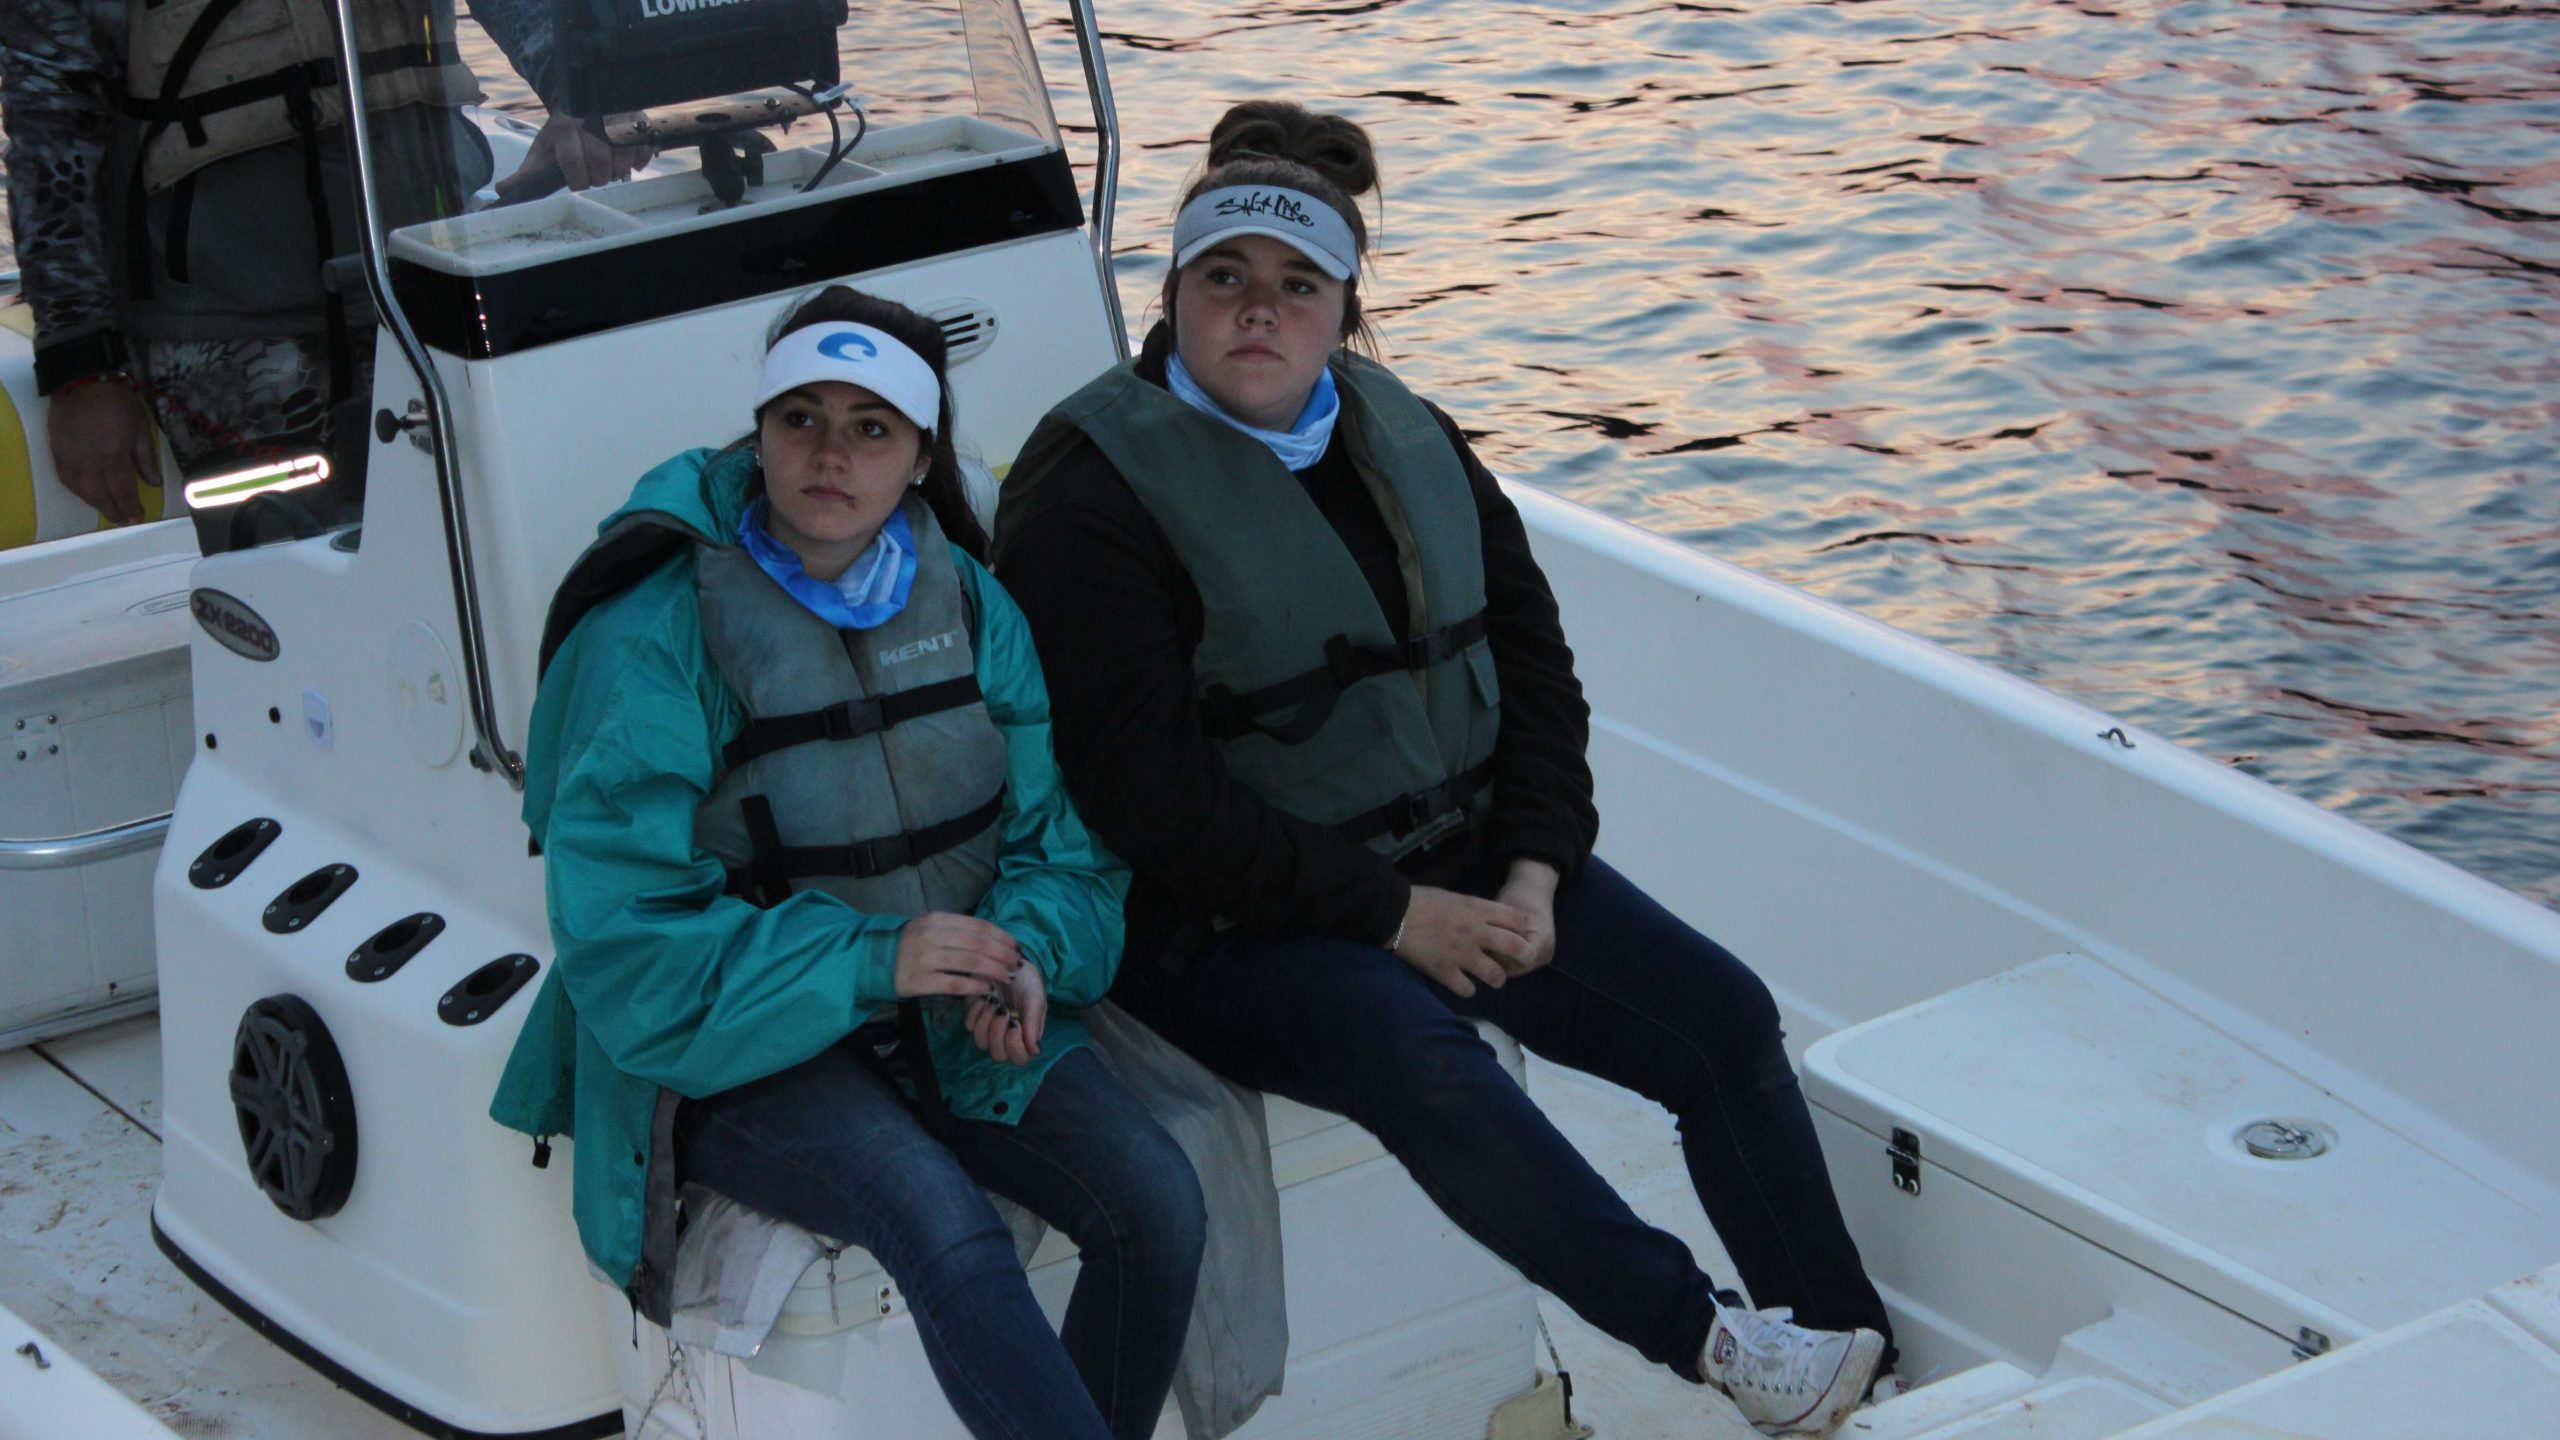 Gennah Prince and Hayleigh Moore are an all-female fishing duo in the competition.